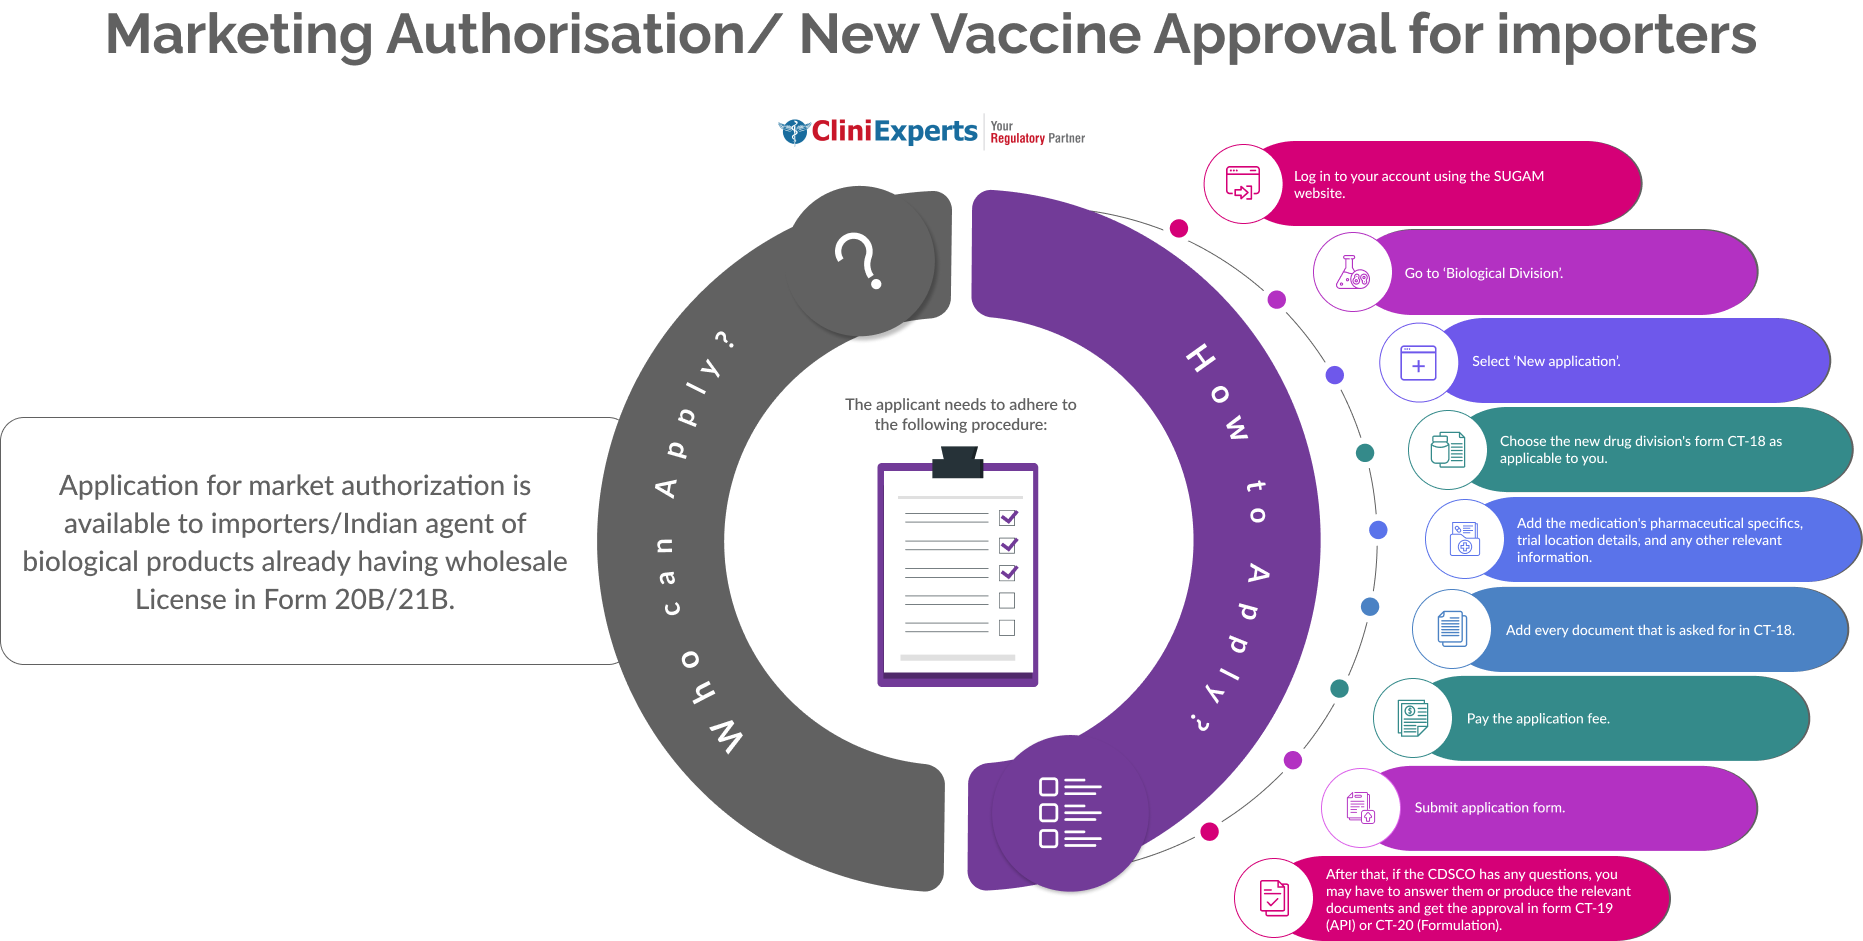 New Vaccine Approval